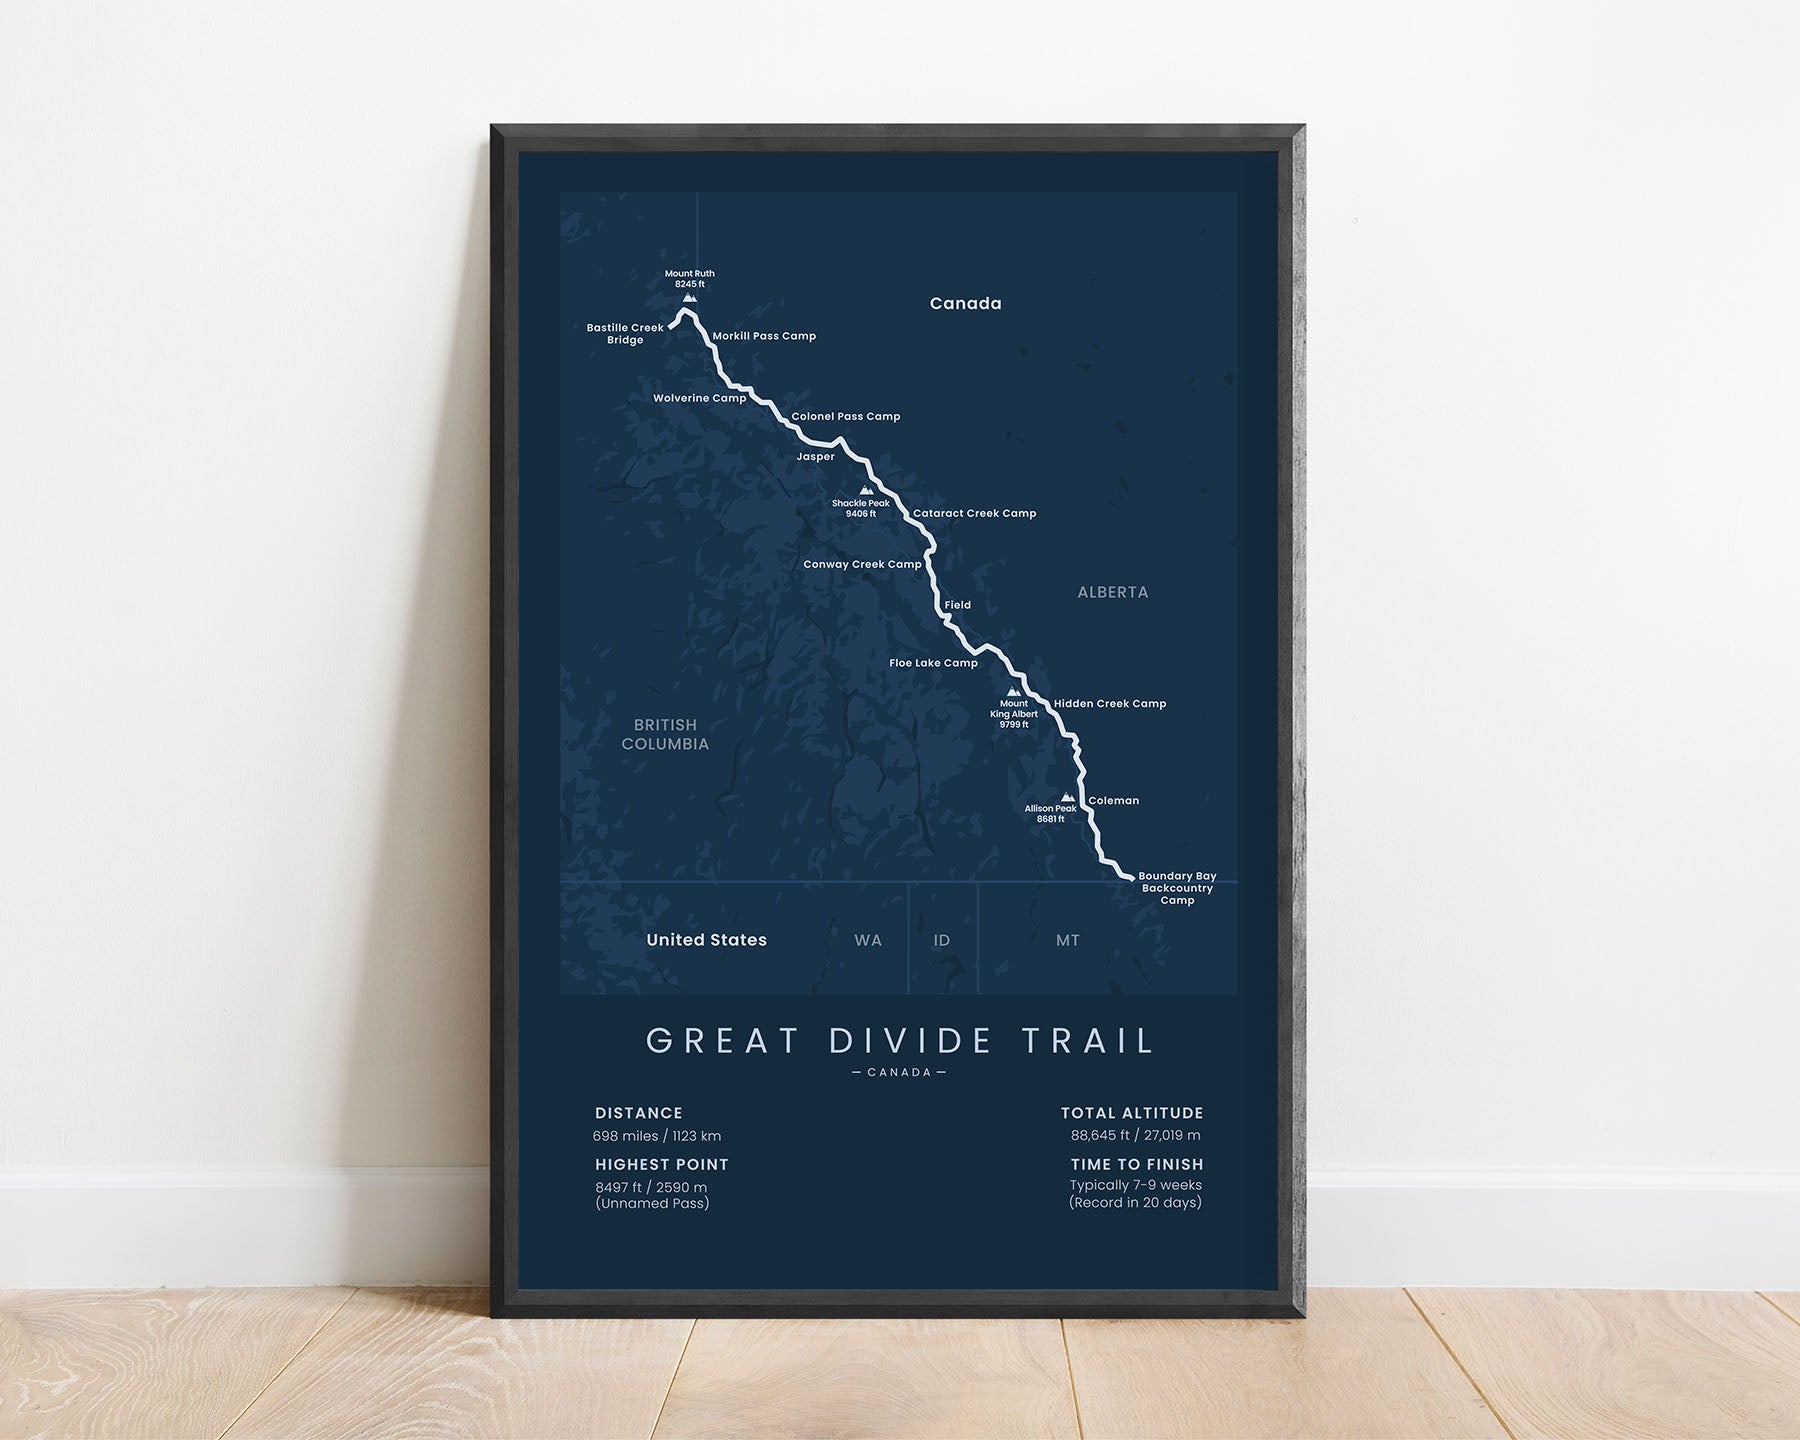 GDT (Canadian Rockies) trek poster with blue background